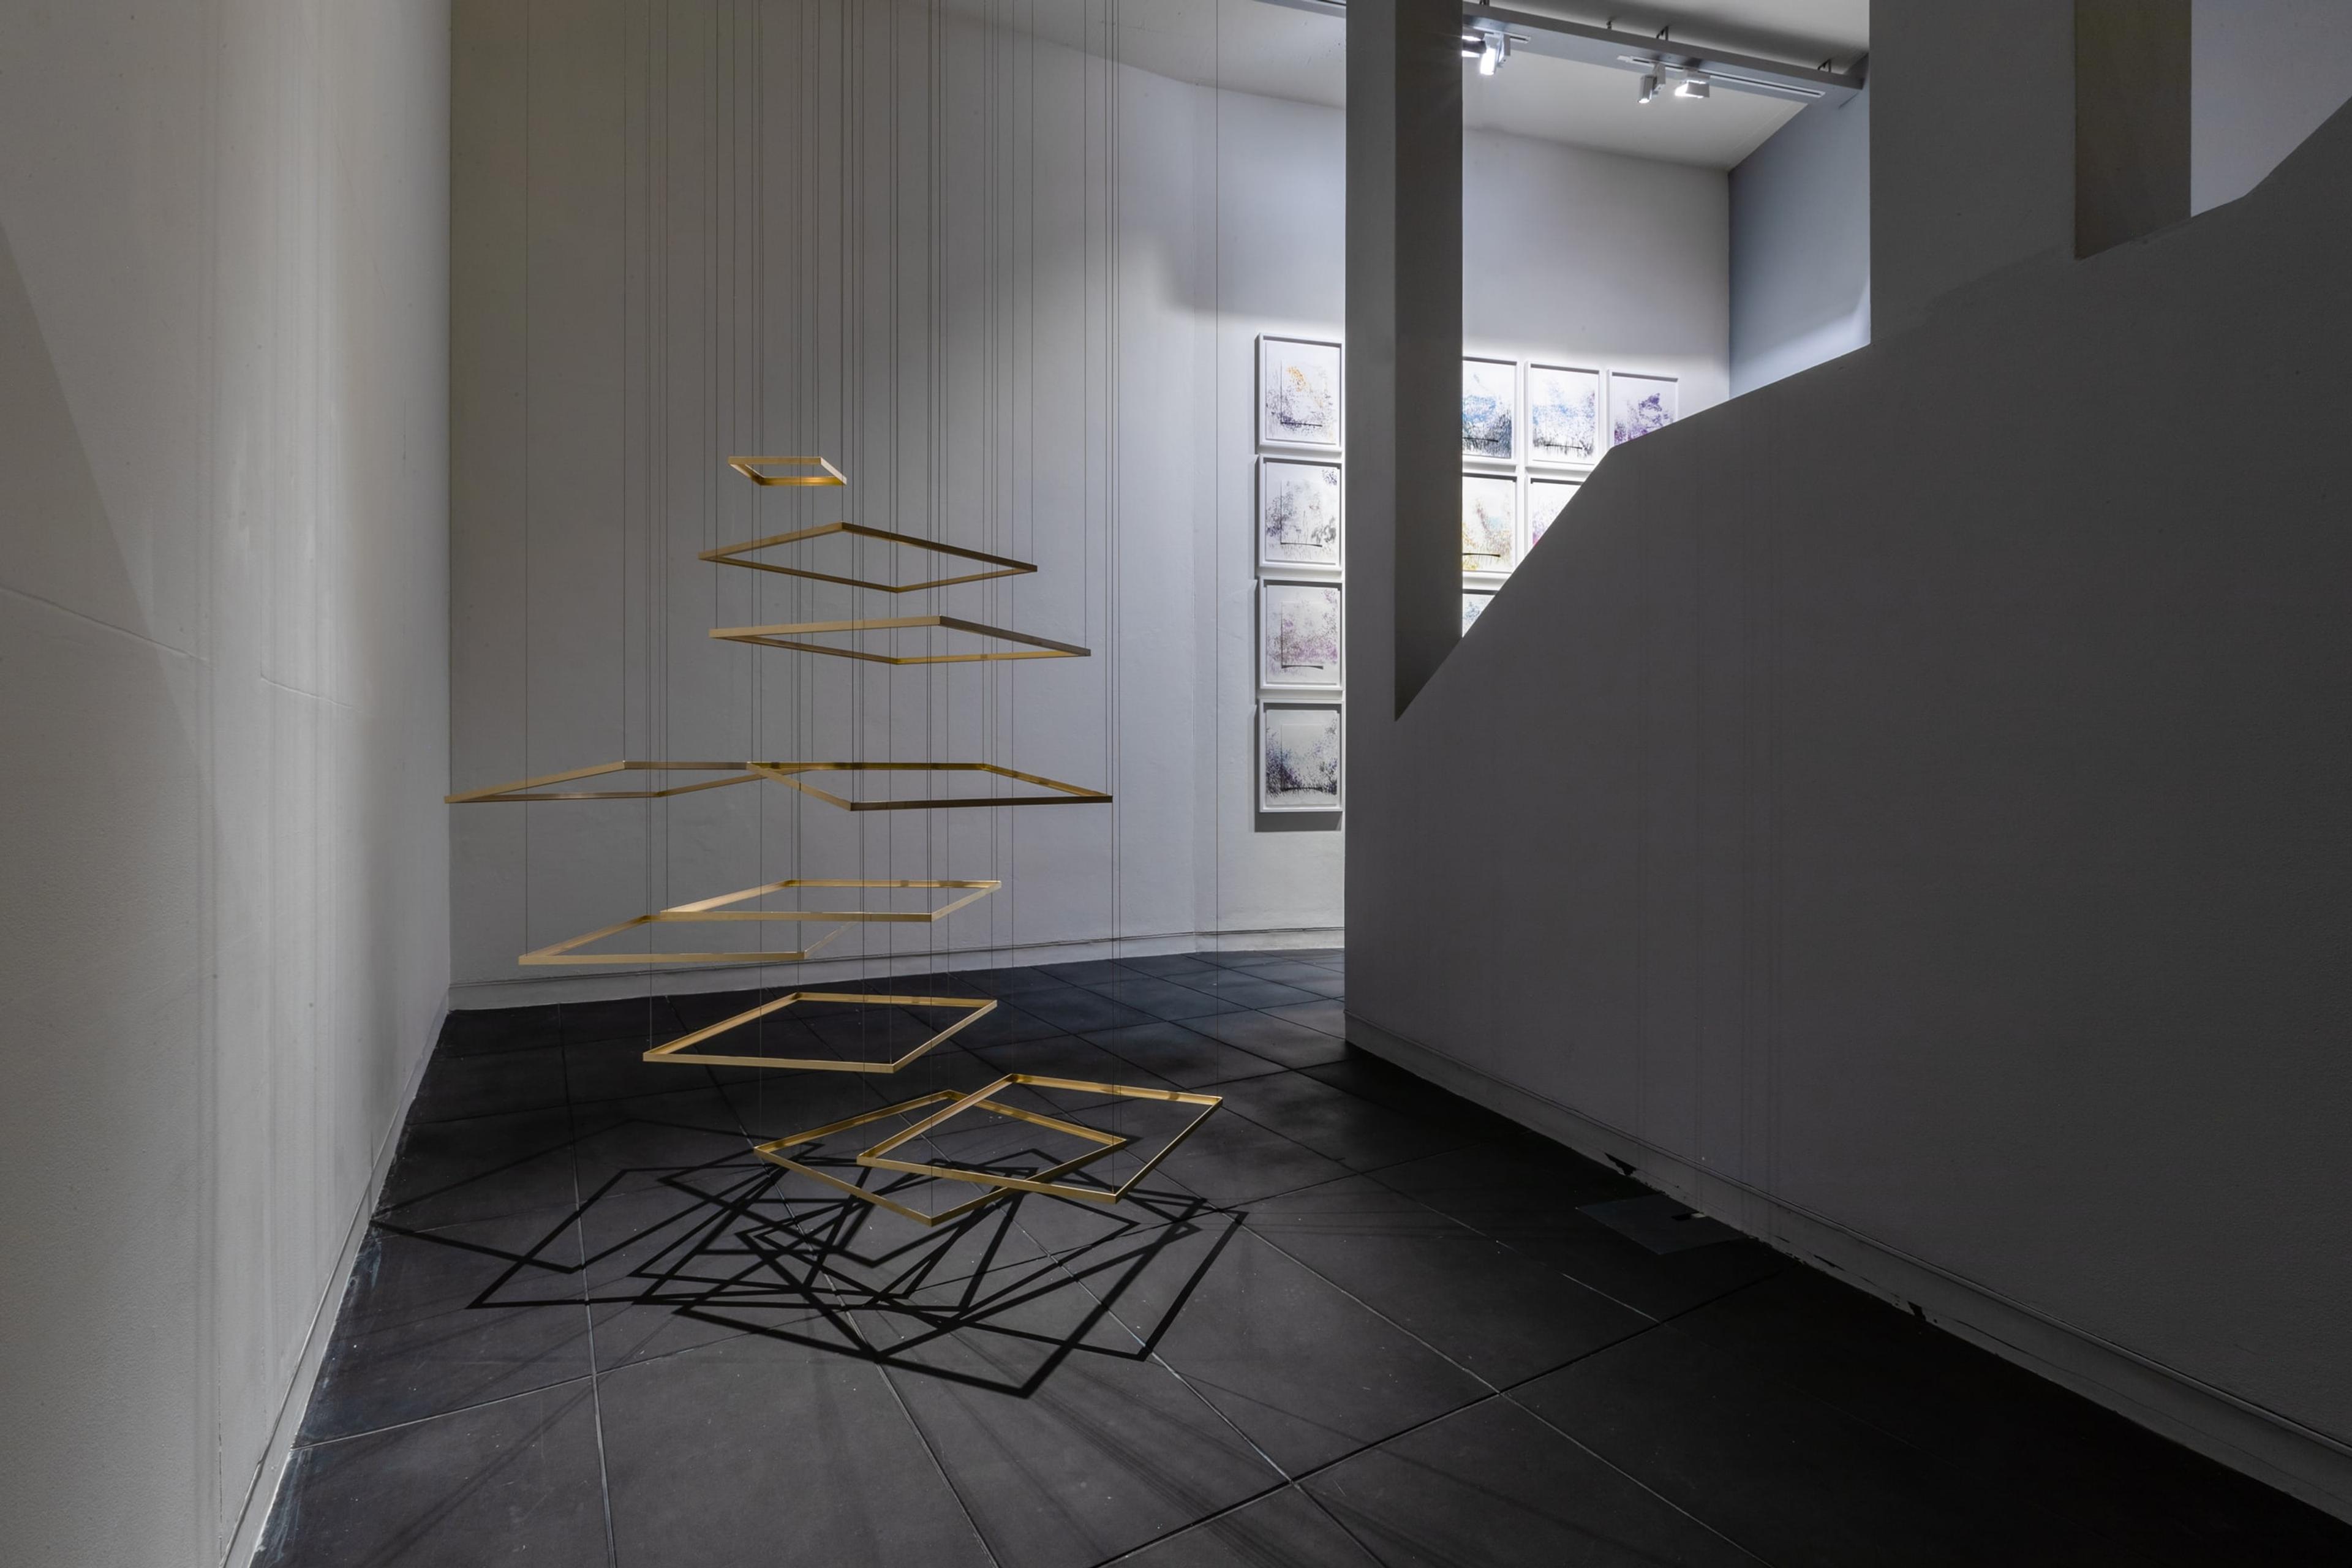 Installation view, Ten Parts Whole (2014) in Energy Work: Kathy Barry/Sarah Smuts Kennedy, Te Pātaka Toi Adam Art Gallery, Victoria University of Wellington. Photo: Ted Whitaker